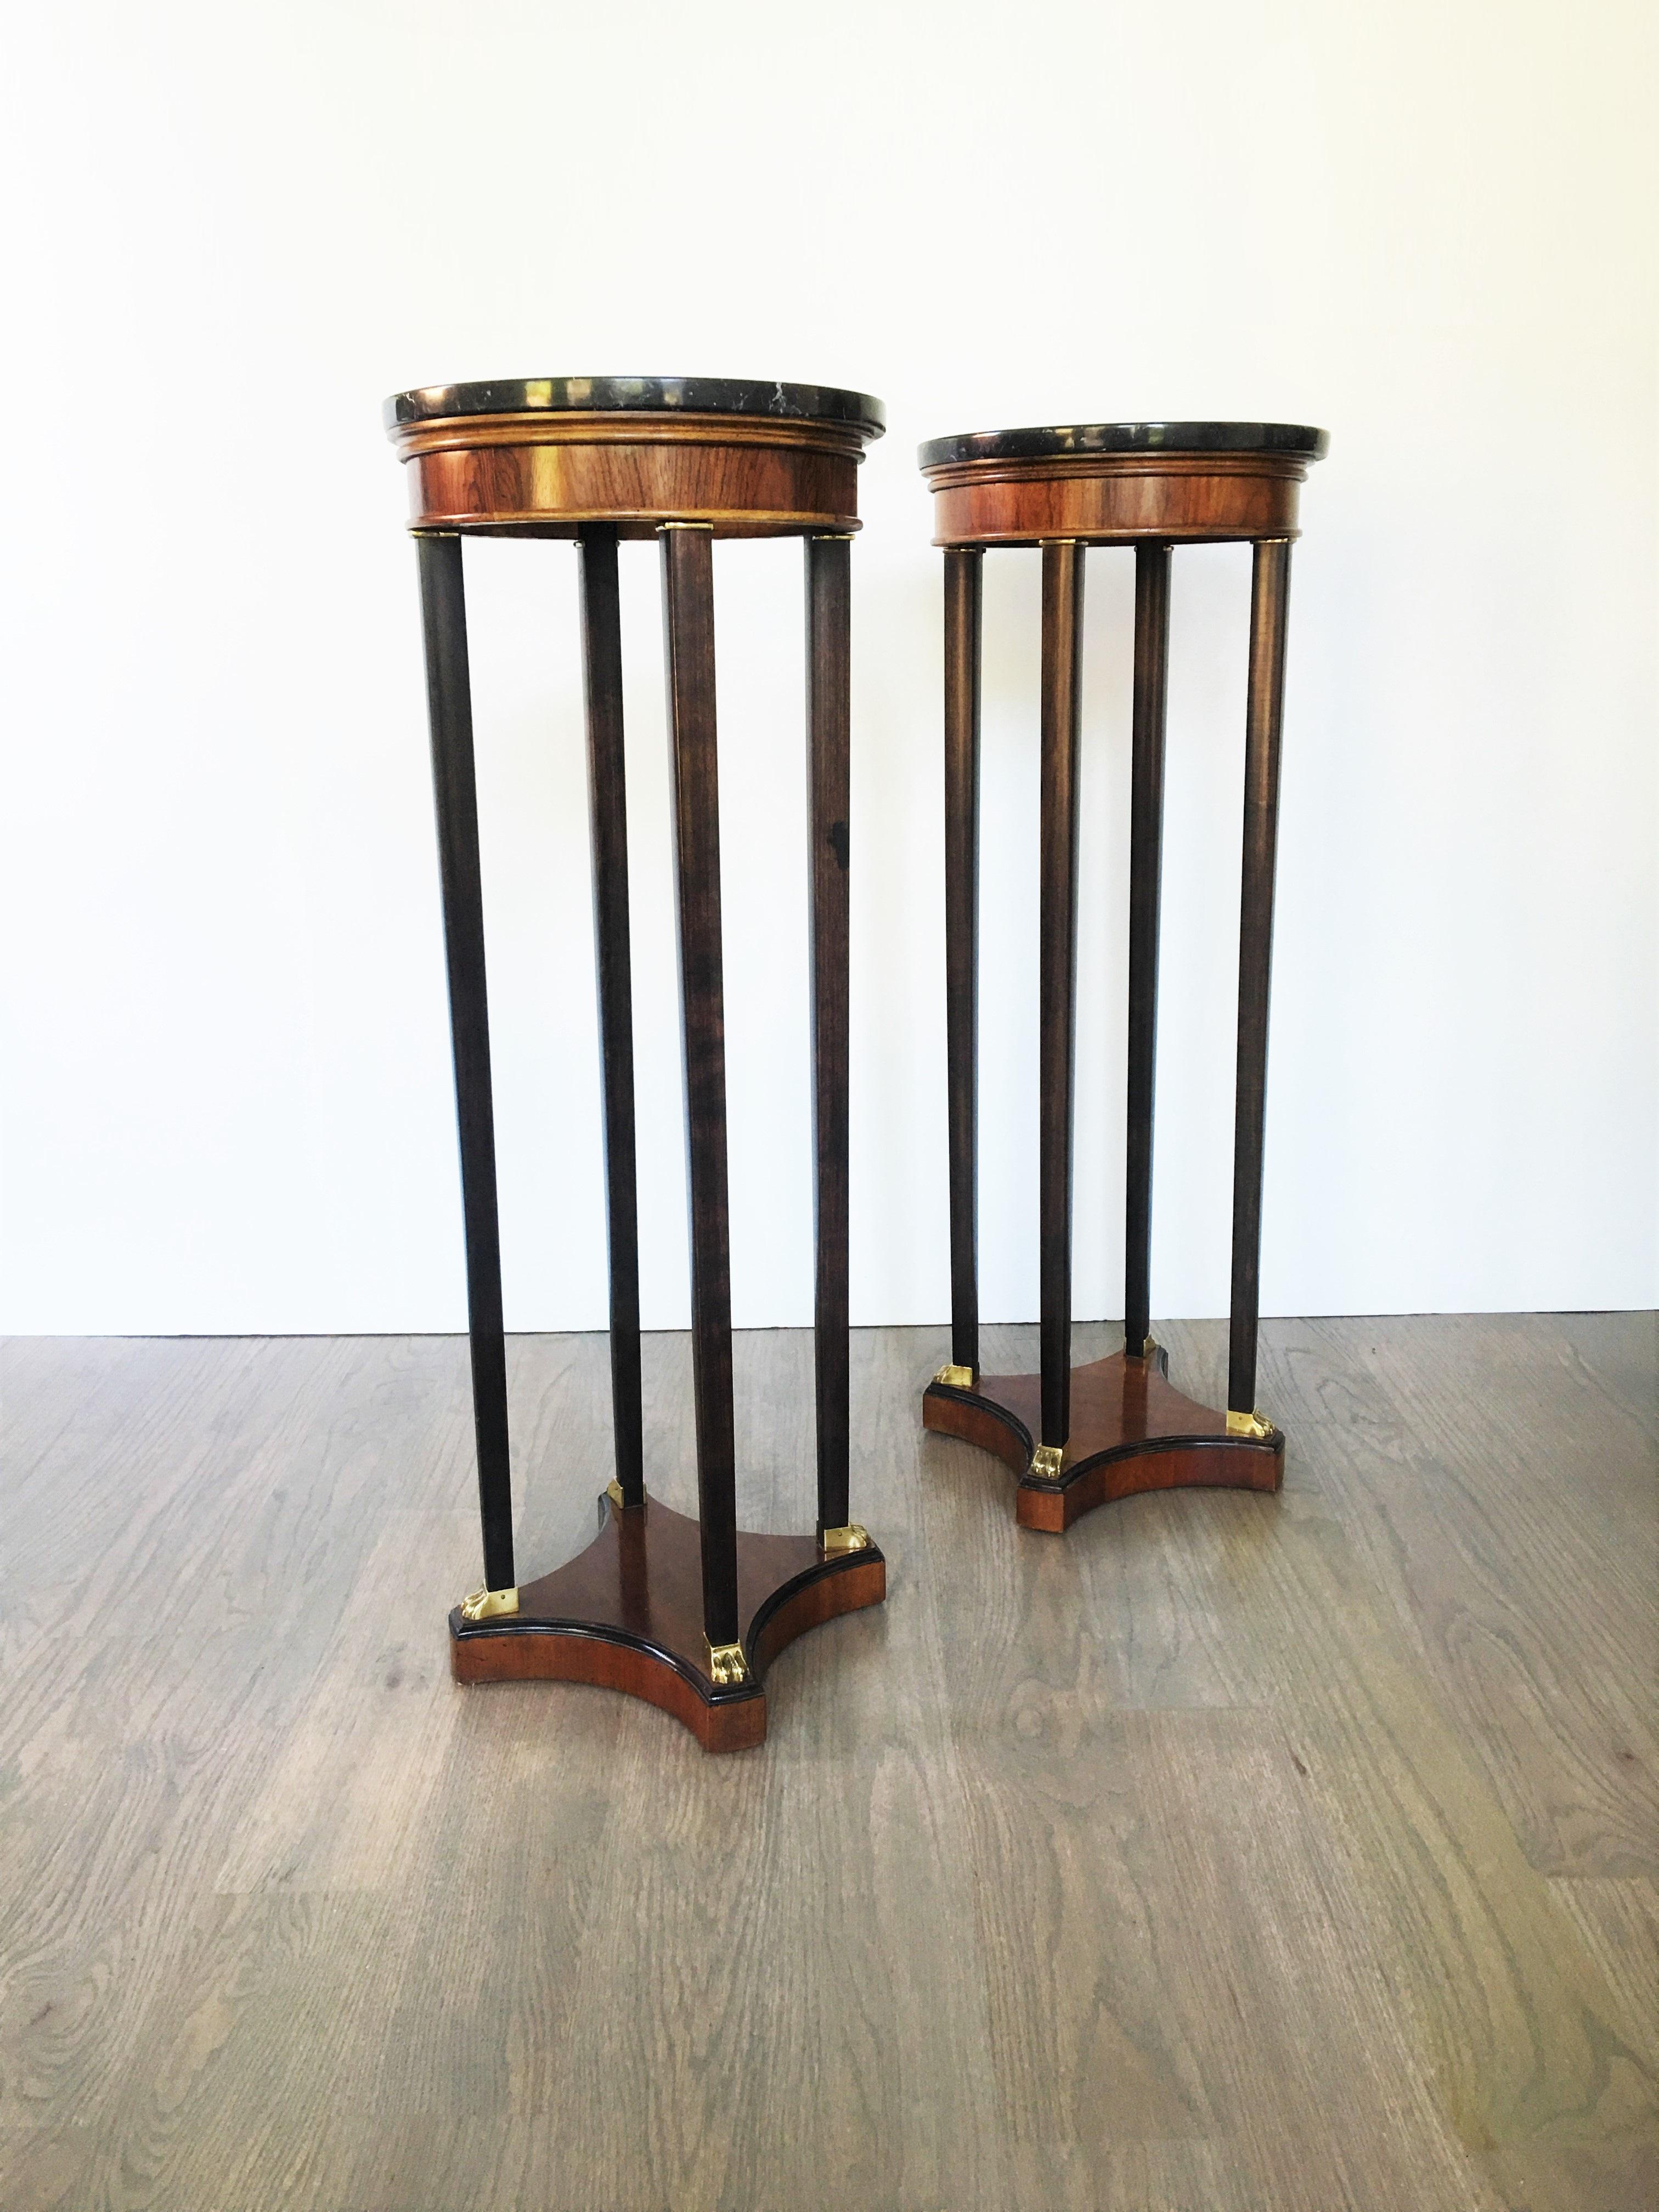 An outstanding pair of classically shaped tall plant stands or display pedestals. Done in a gorgeous rose wood with complimenting ebonized legs. Each pedestal consists of a beautiful circular marble top with a nice rosewood apron below. The long,